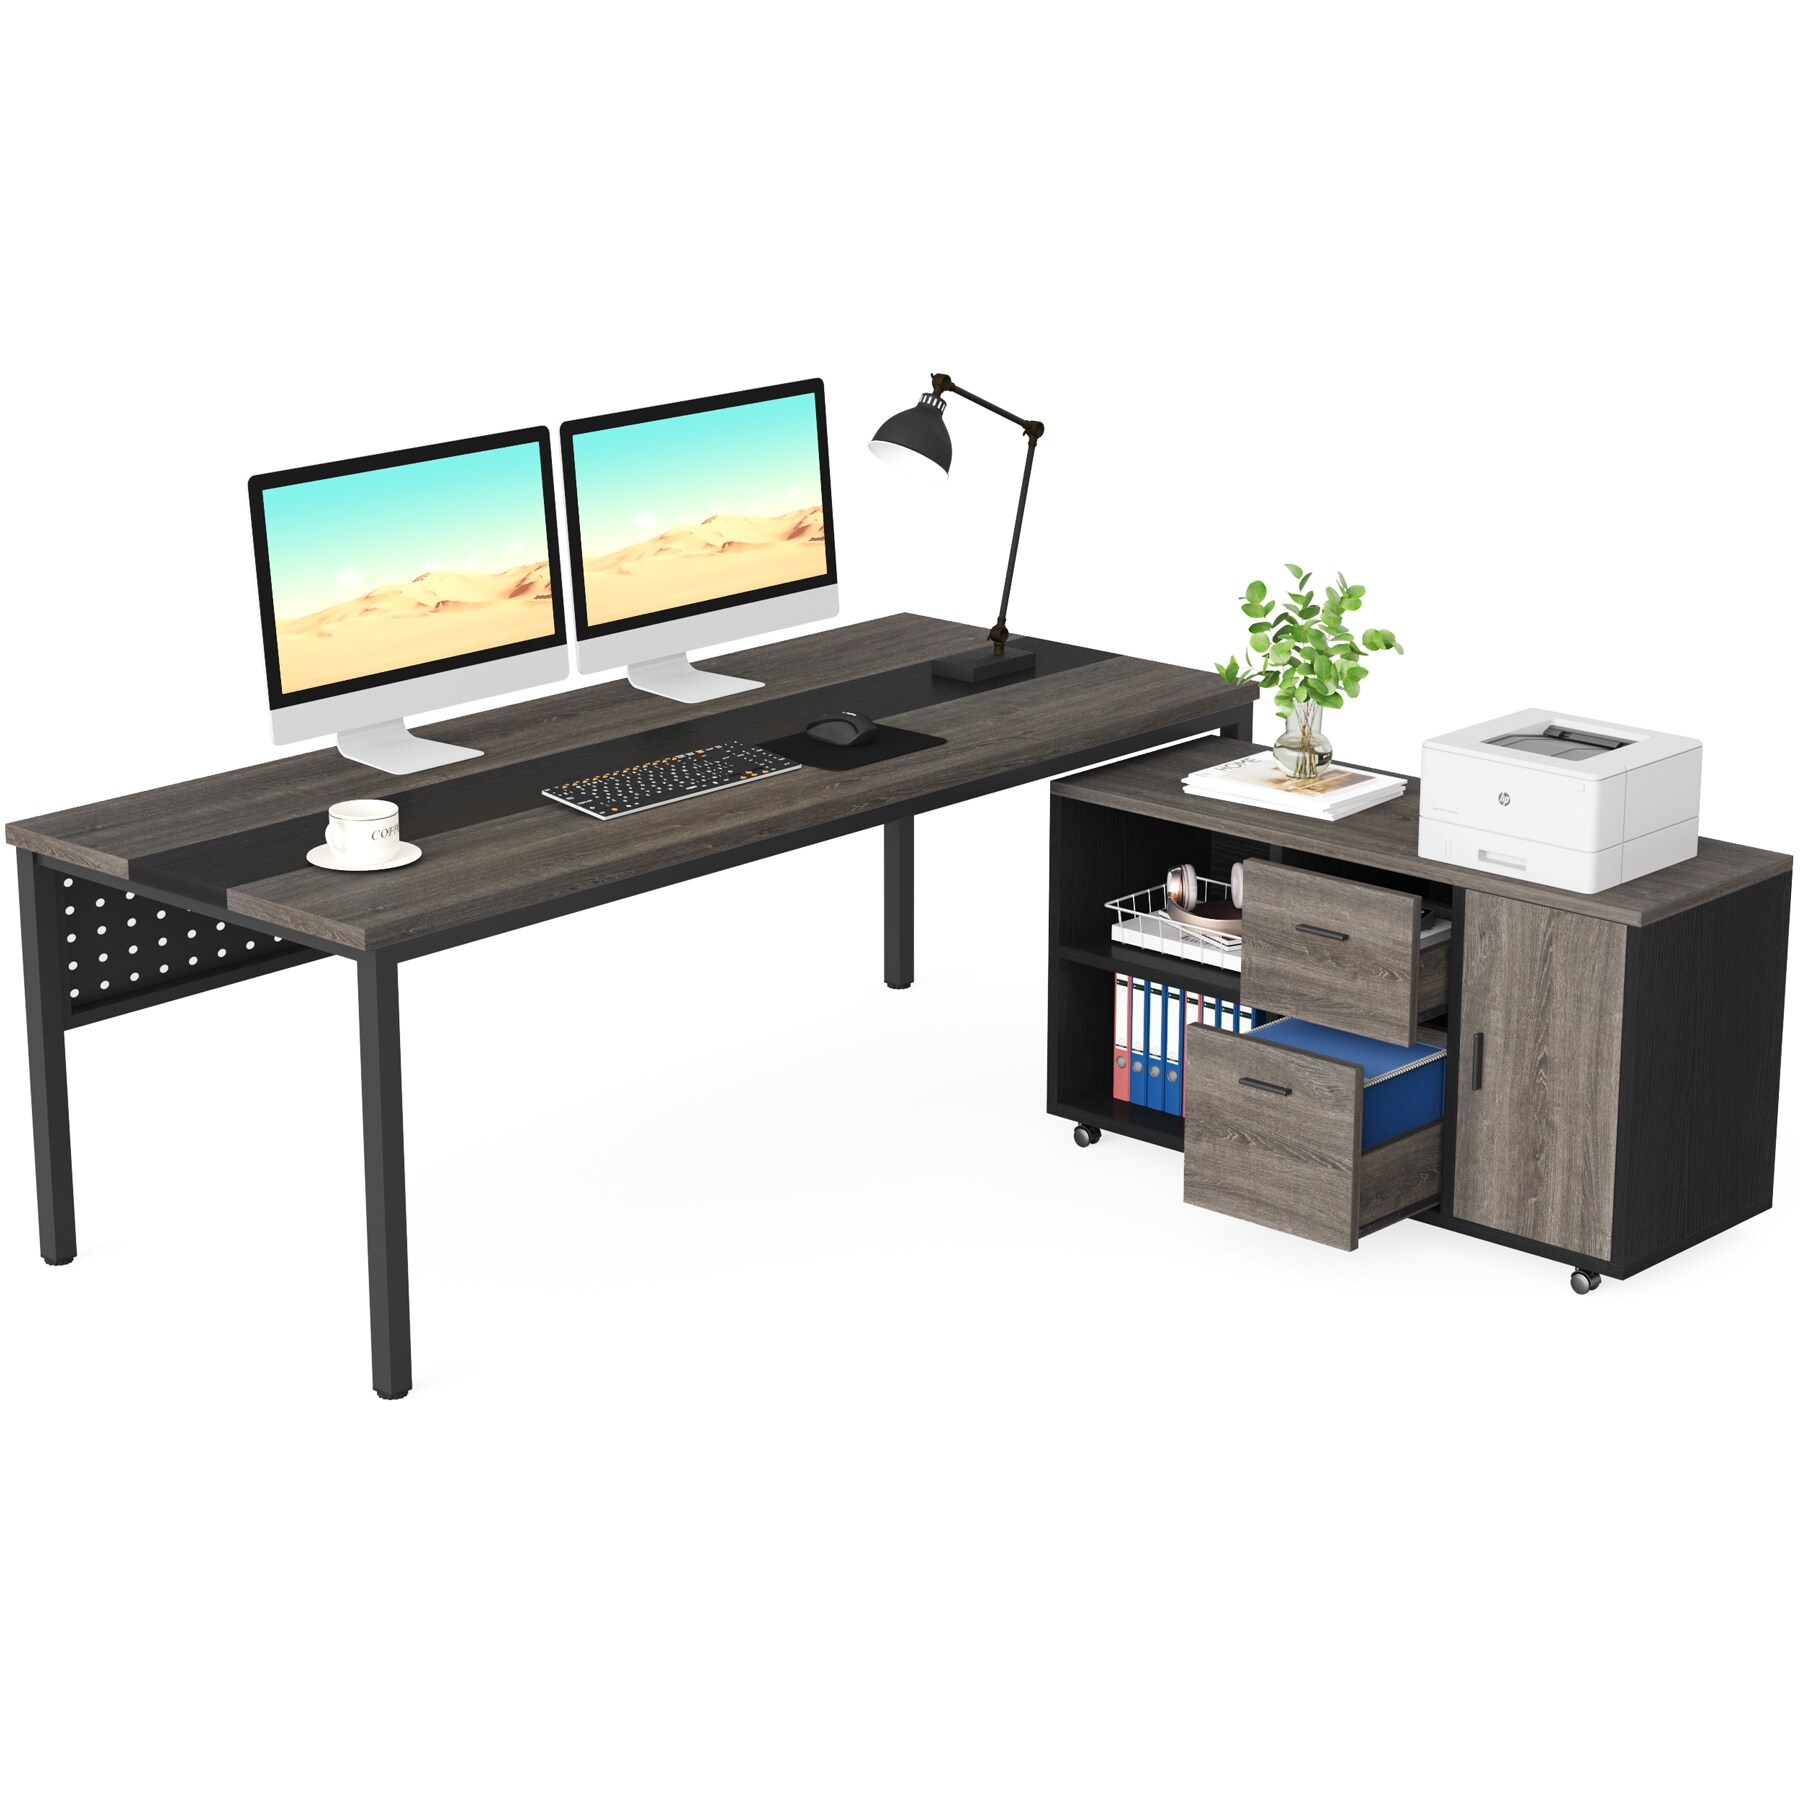 https://ak1.ostkcdn.com/images/products/is/images/direct/a70ac7116d8ee16e9b4ae9c75f4c2d16ec24df22/Modern-Executive-Desk%2C-70.8%27%27-Computer-Desk-with-47-inch-Lateral-File-Cabinet-for-Home-Office.jpg